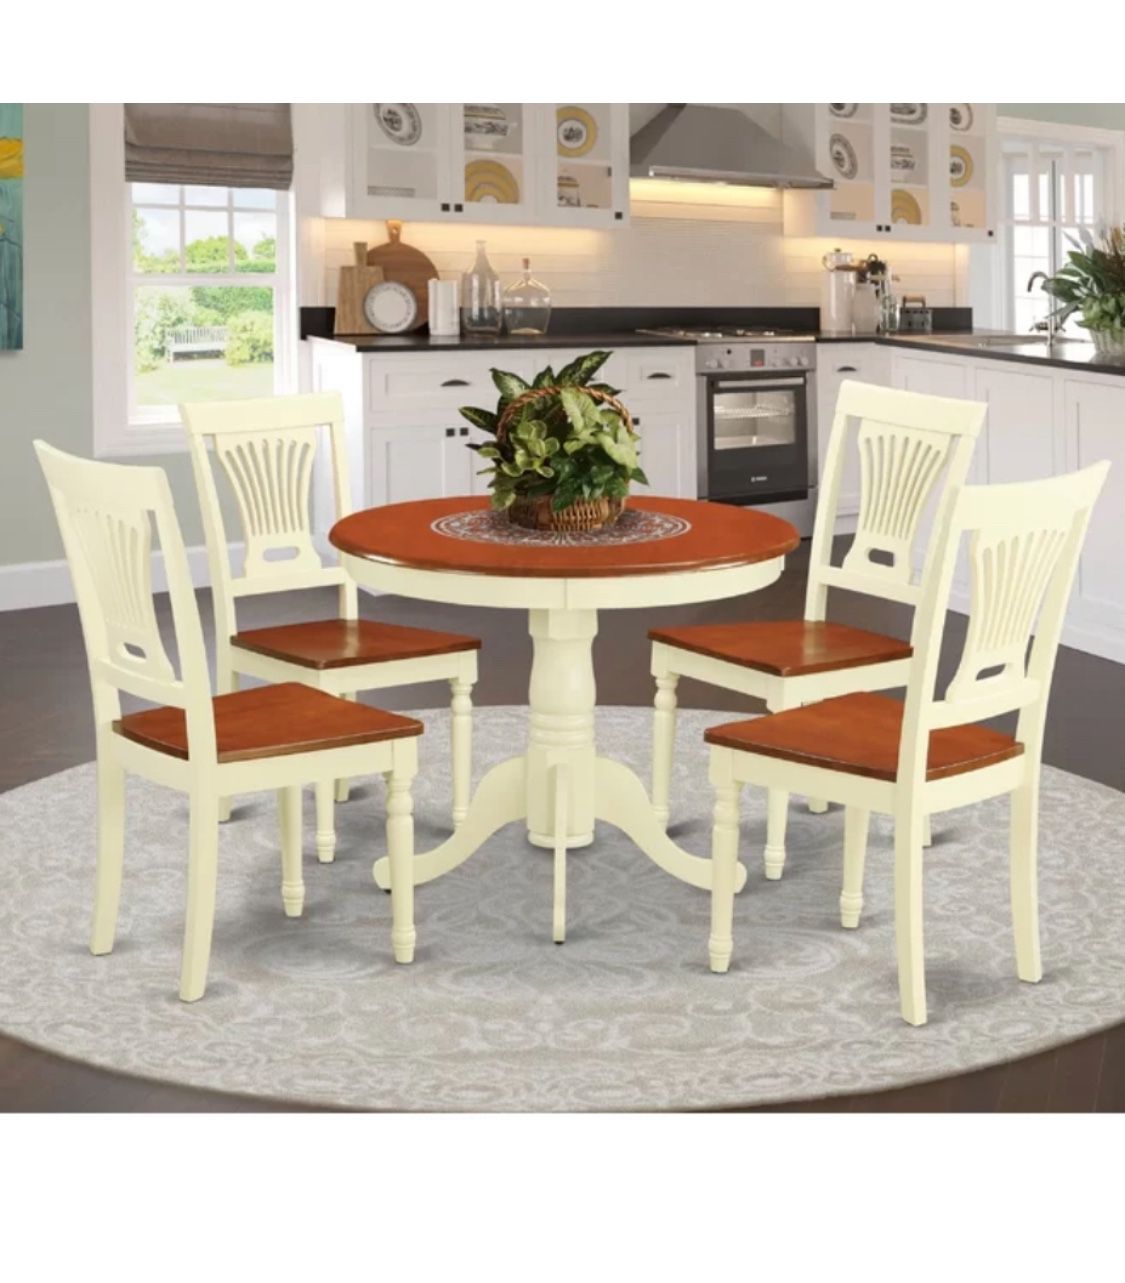 Brand New Kitchen Table And Chairs Set